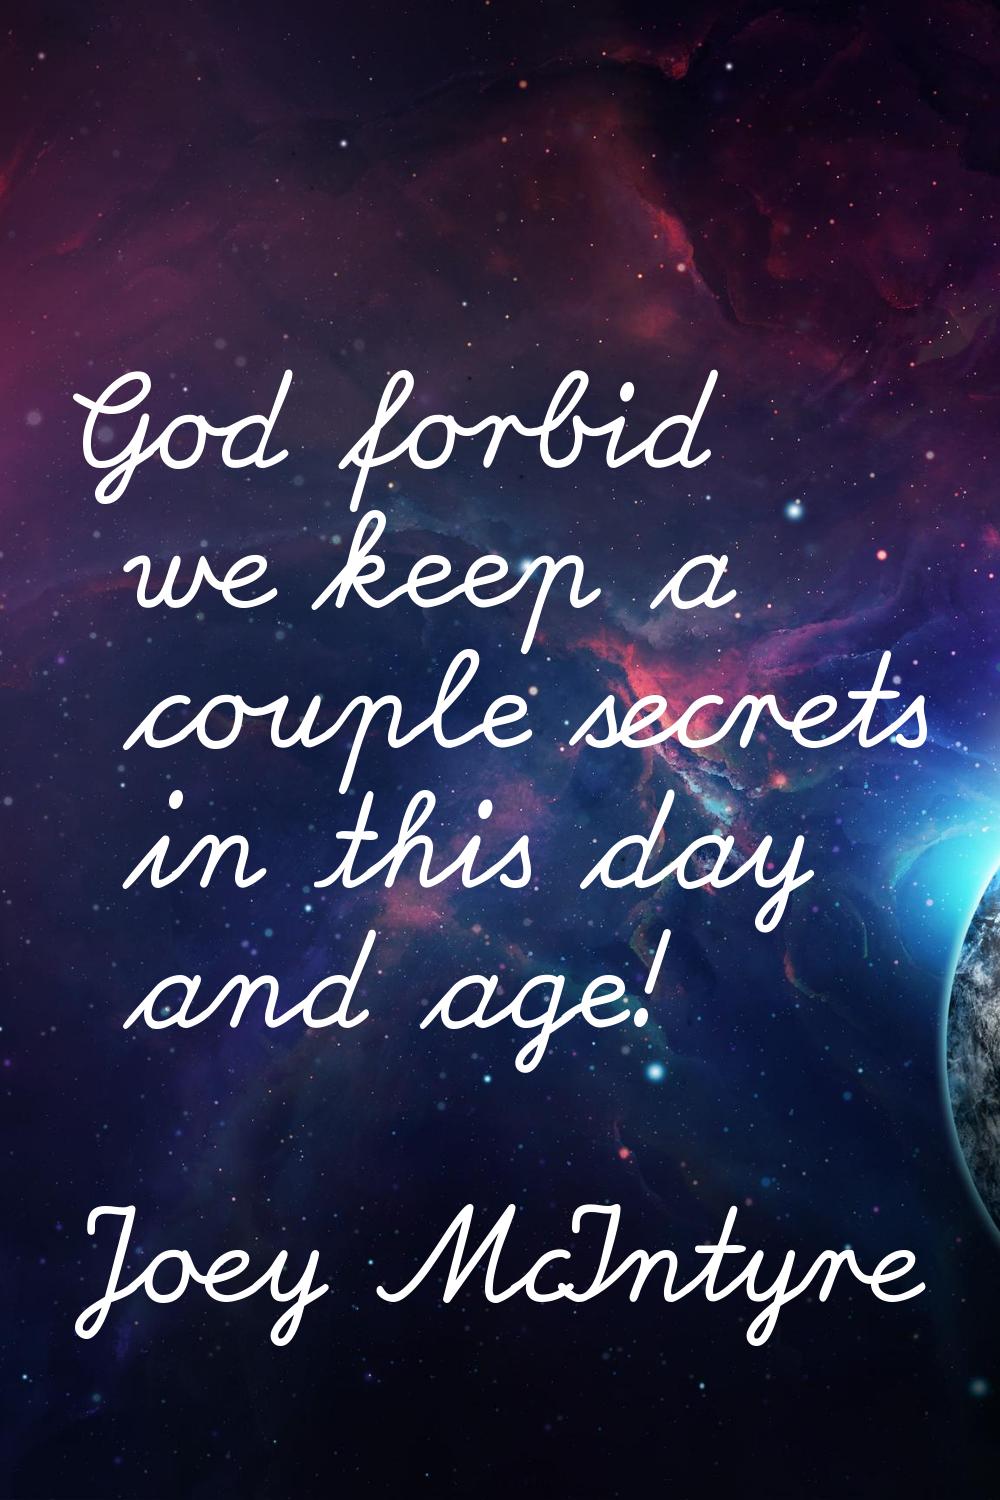 God forbid we keep a couple secrets in this day and age!